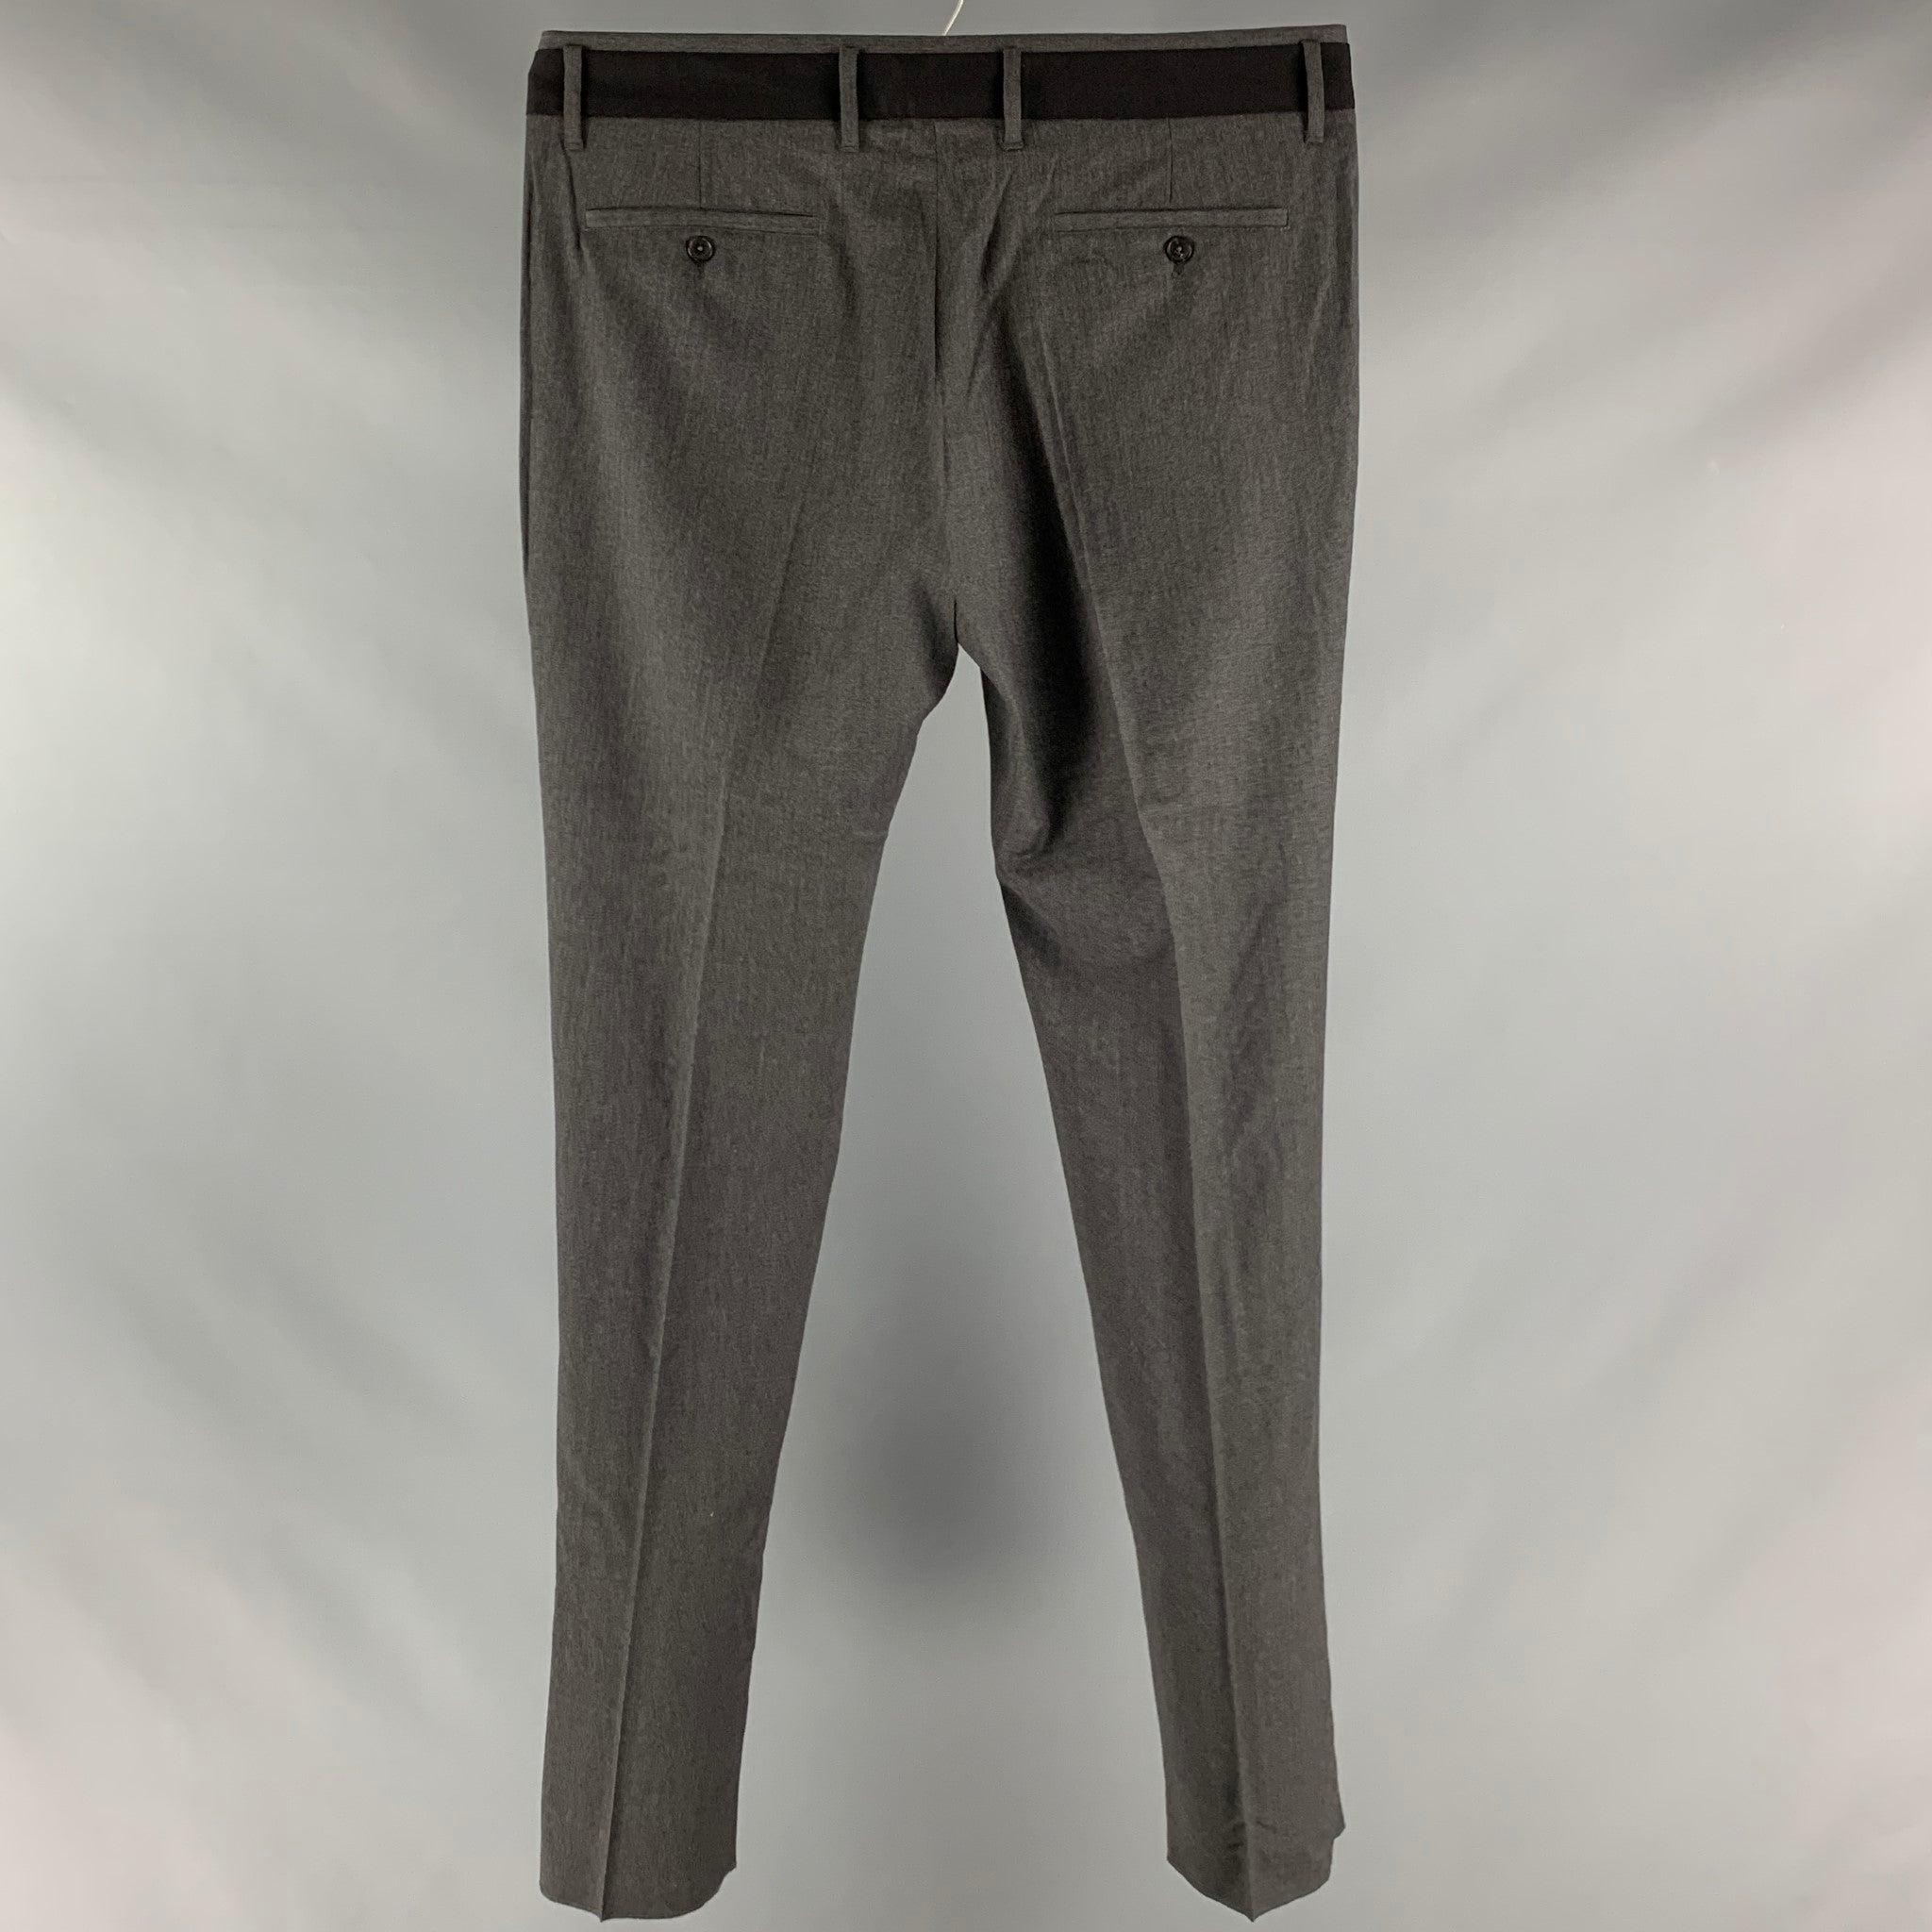 VIKTOR & ROLF tuxedo dress pants comes in a dark gray & black wool featuring a flat front, slim fit, front tab, and a zip fly closure. Made in Italy. New with Tags. 

Marked:  54 

Measurements: 
 Waist: 38 inches Rise: 8 inches Inseam: 38 inches 
